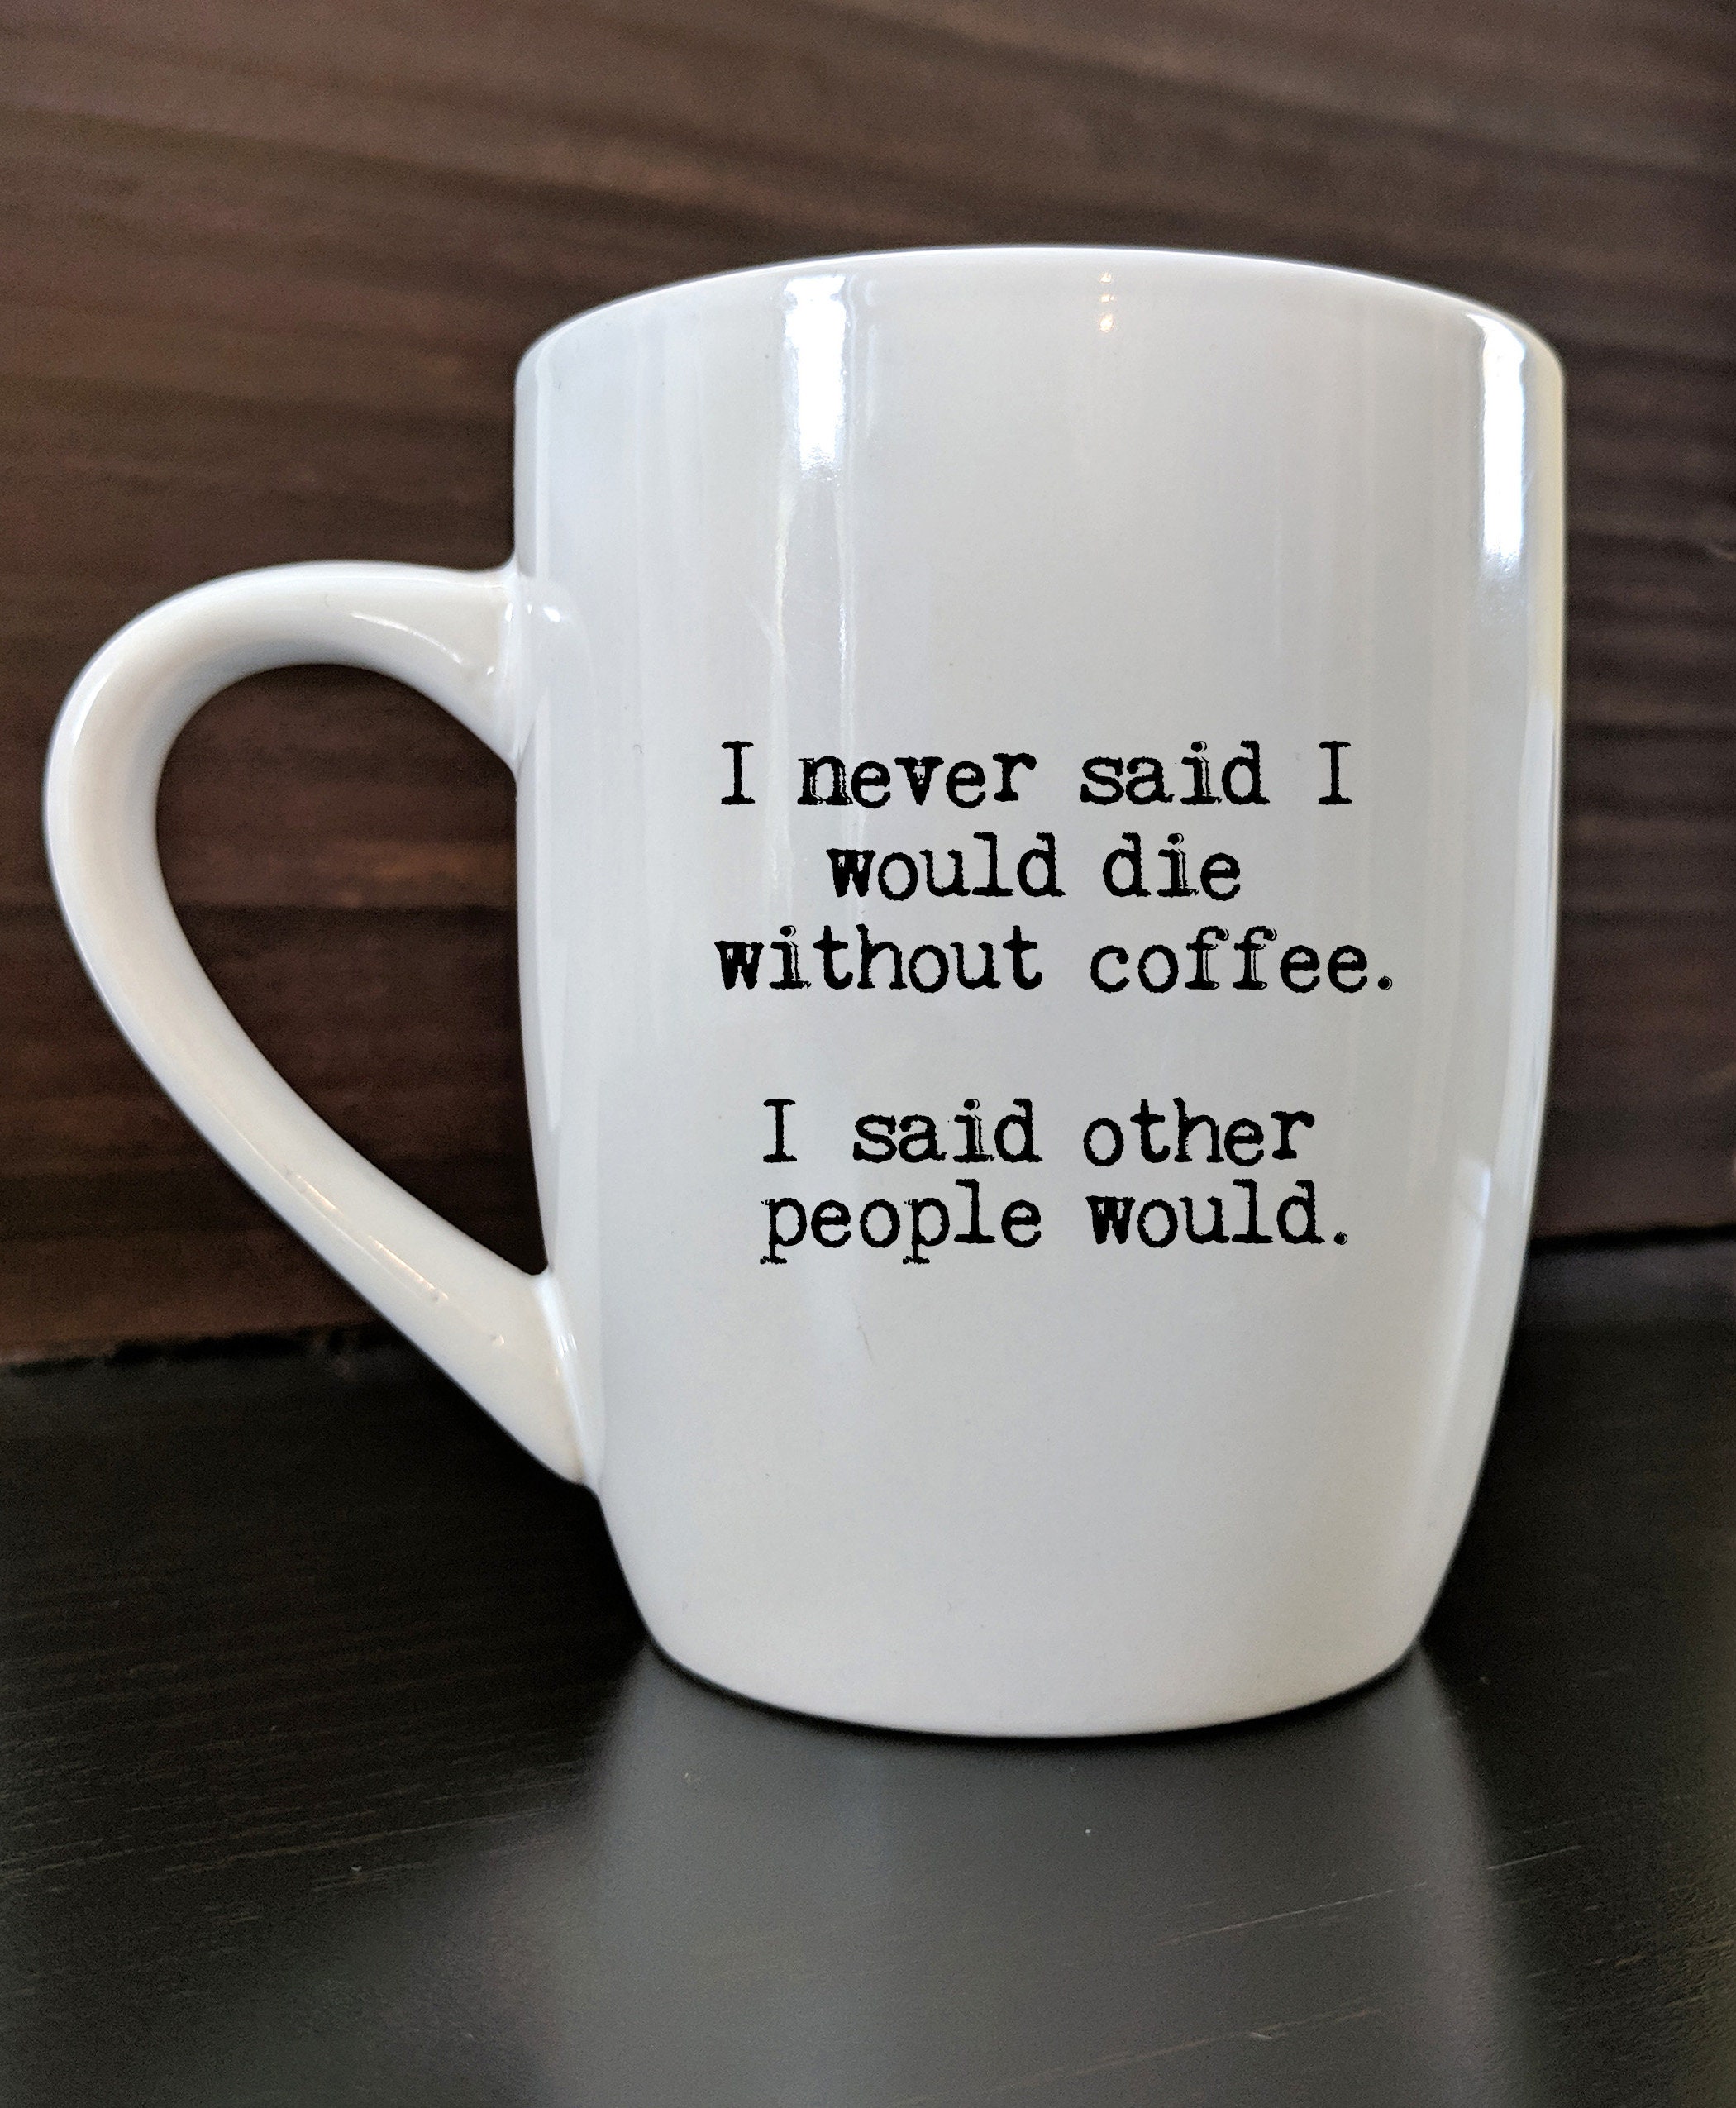 Coffee mug with love message: Needless to say, I'm dying to have